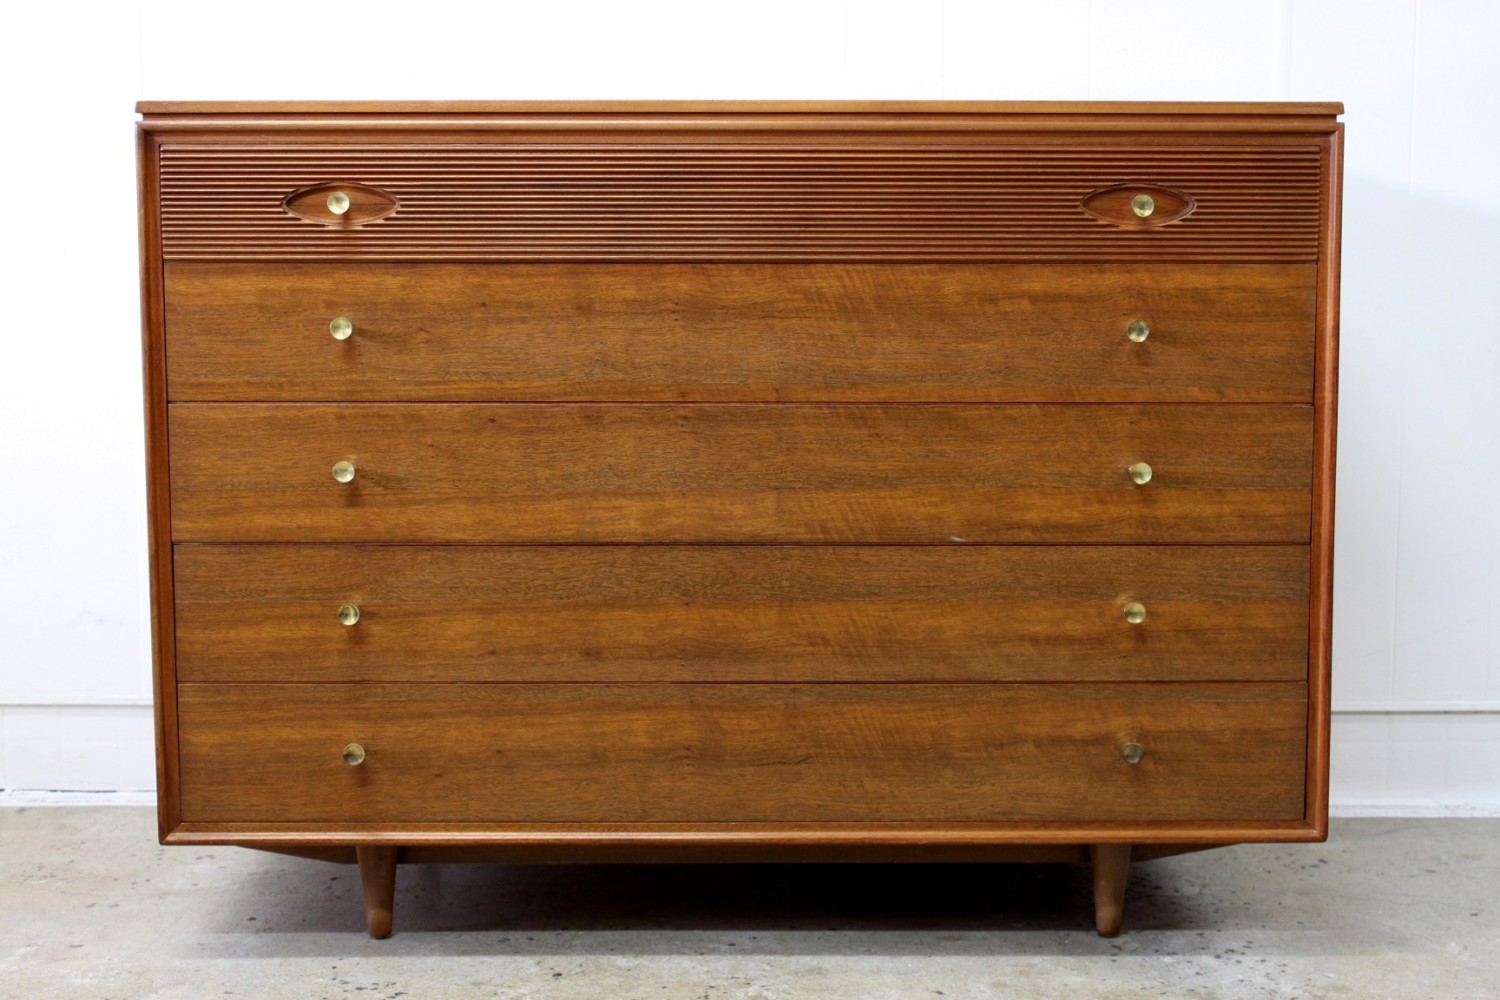 Pair of low drawers by Archie Shine